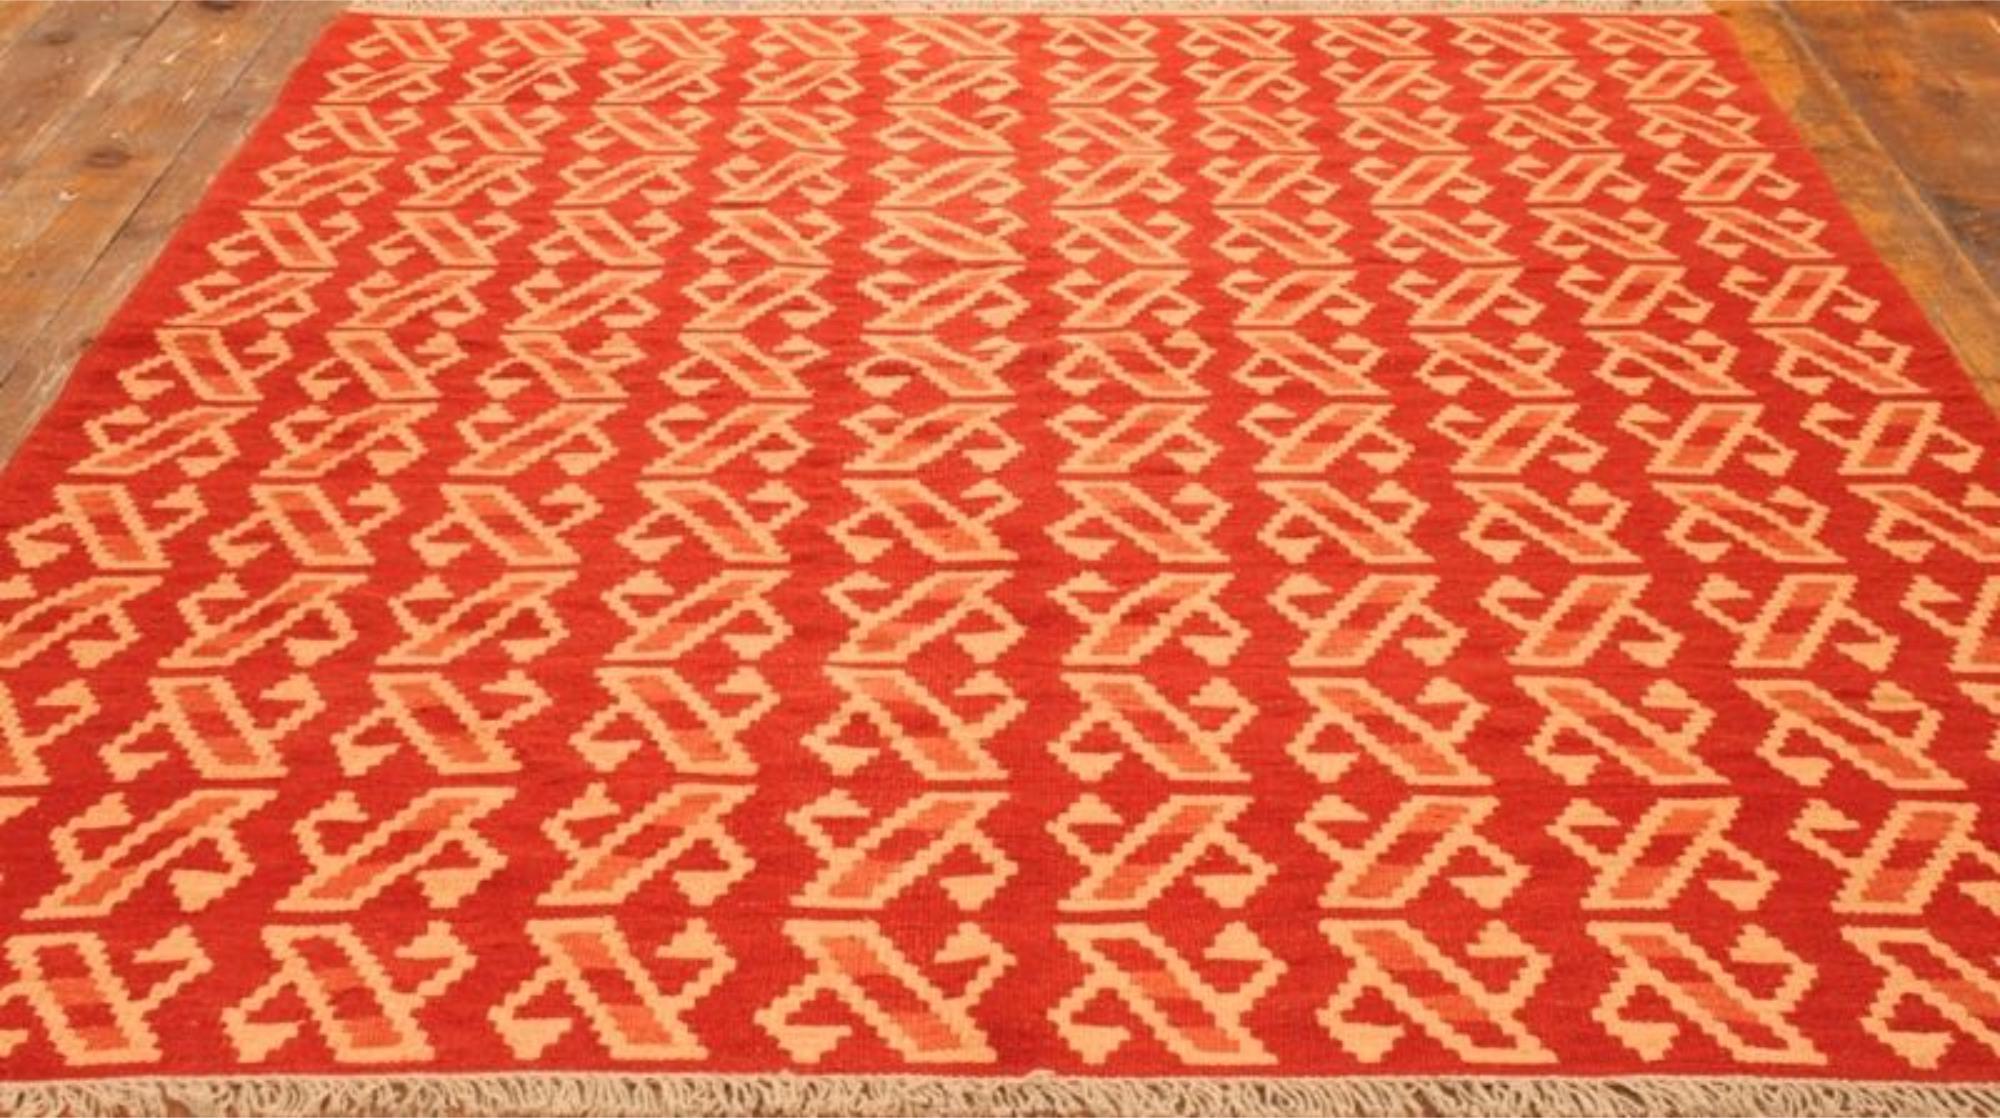 Handmade Vintage Persian Style Ardabil Kilim Rug 5.2' x 6.8', 1970s - 1T36 For Sale 6